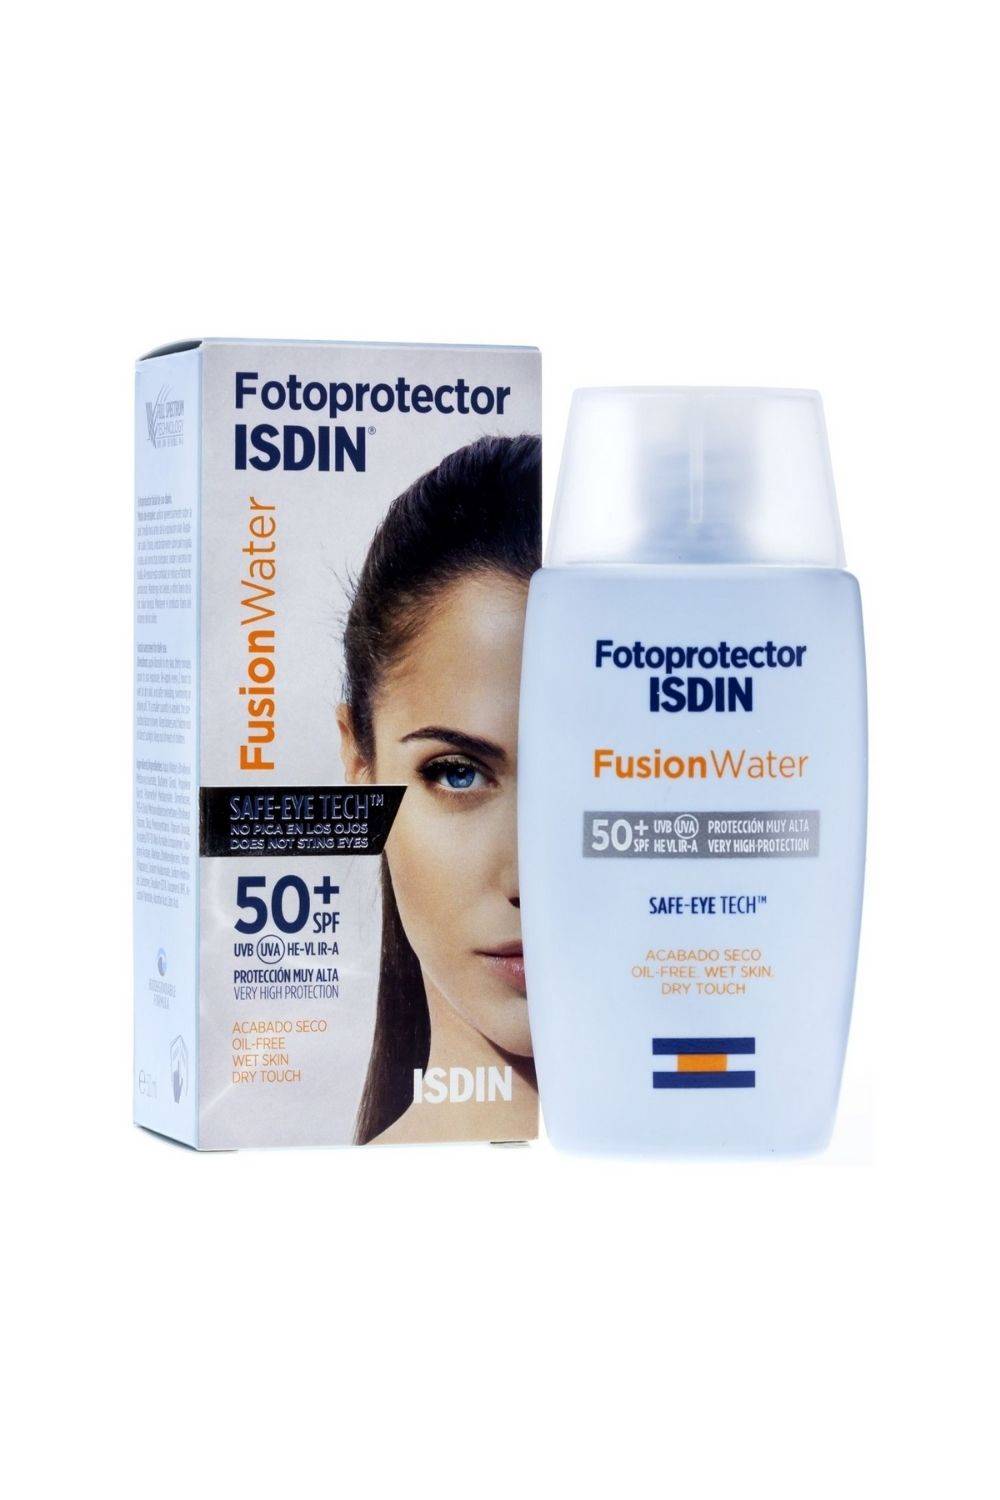 ISDIN® Fotoprotector Fusion Water SPF 50+ 50ml